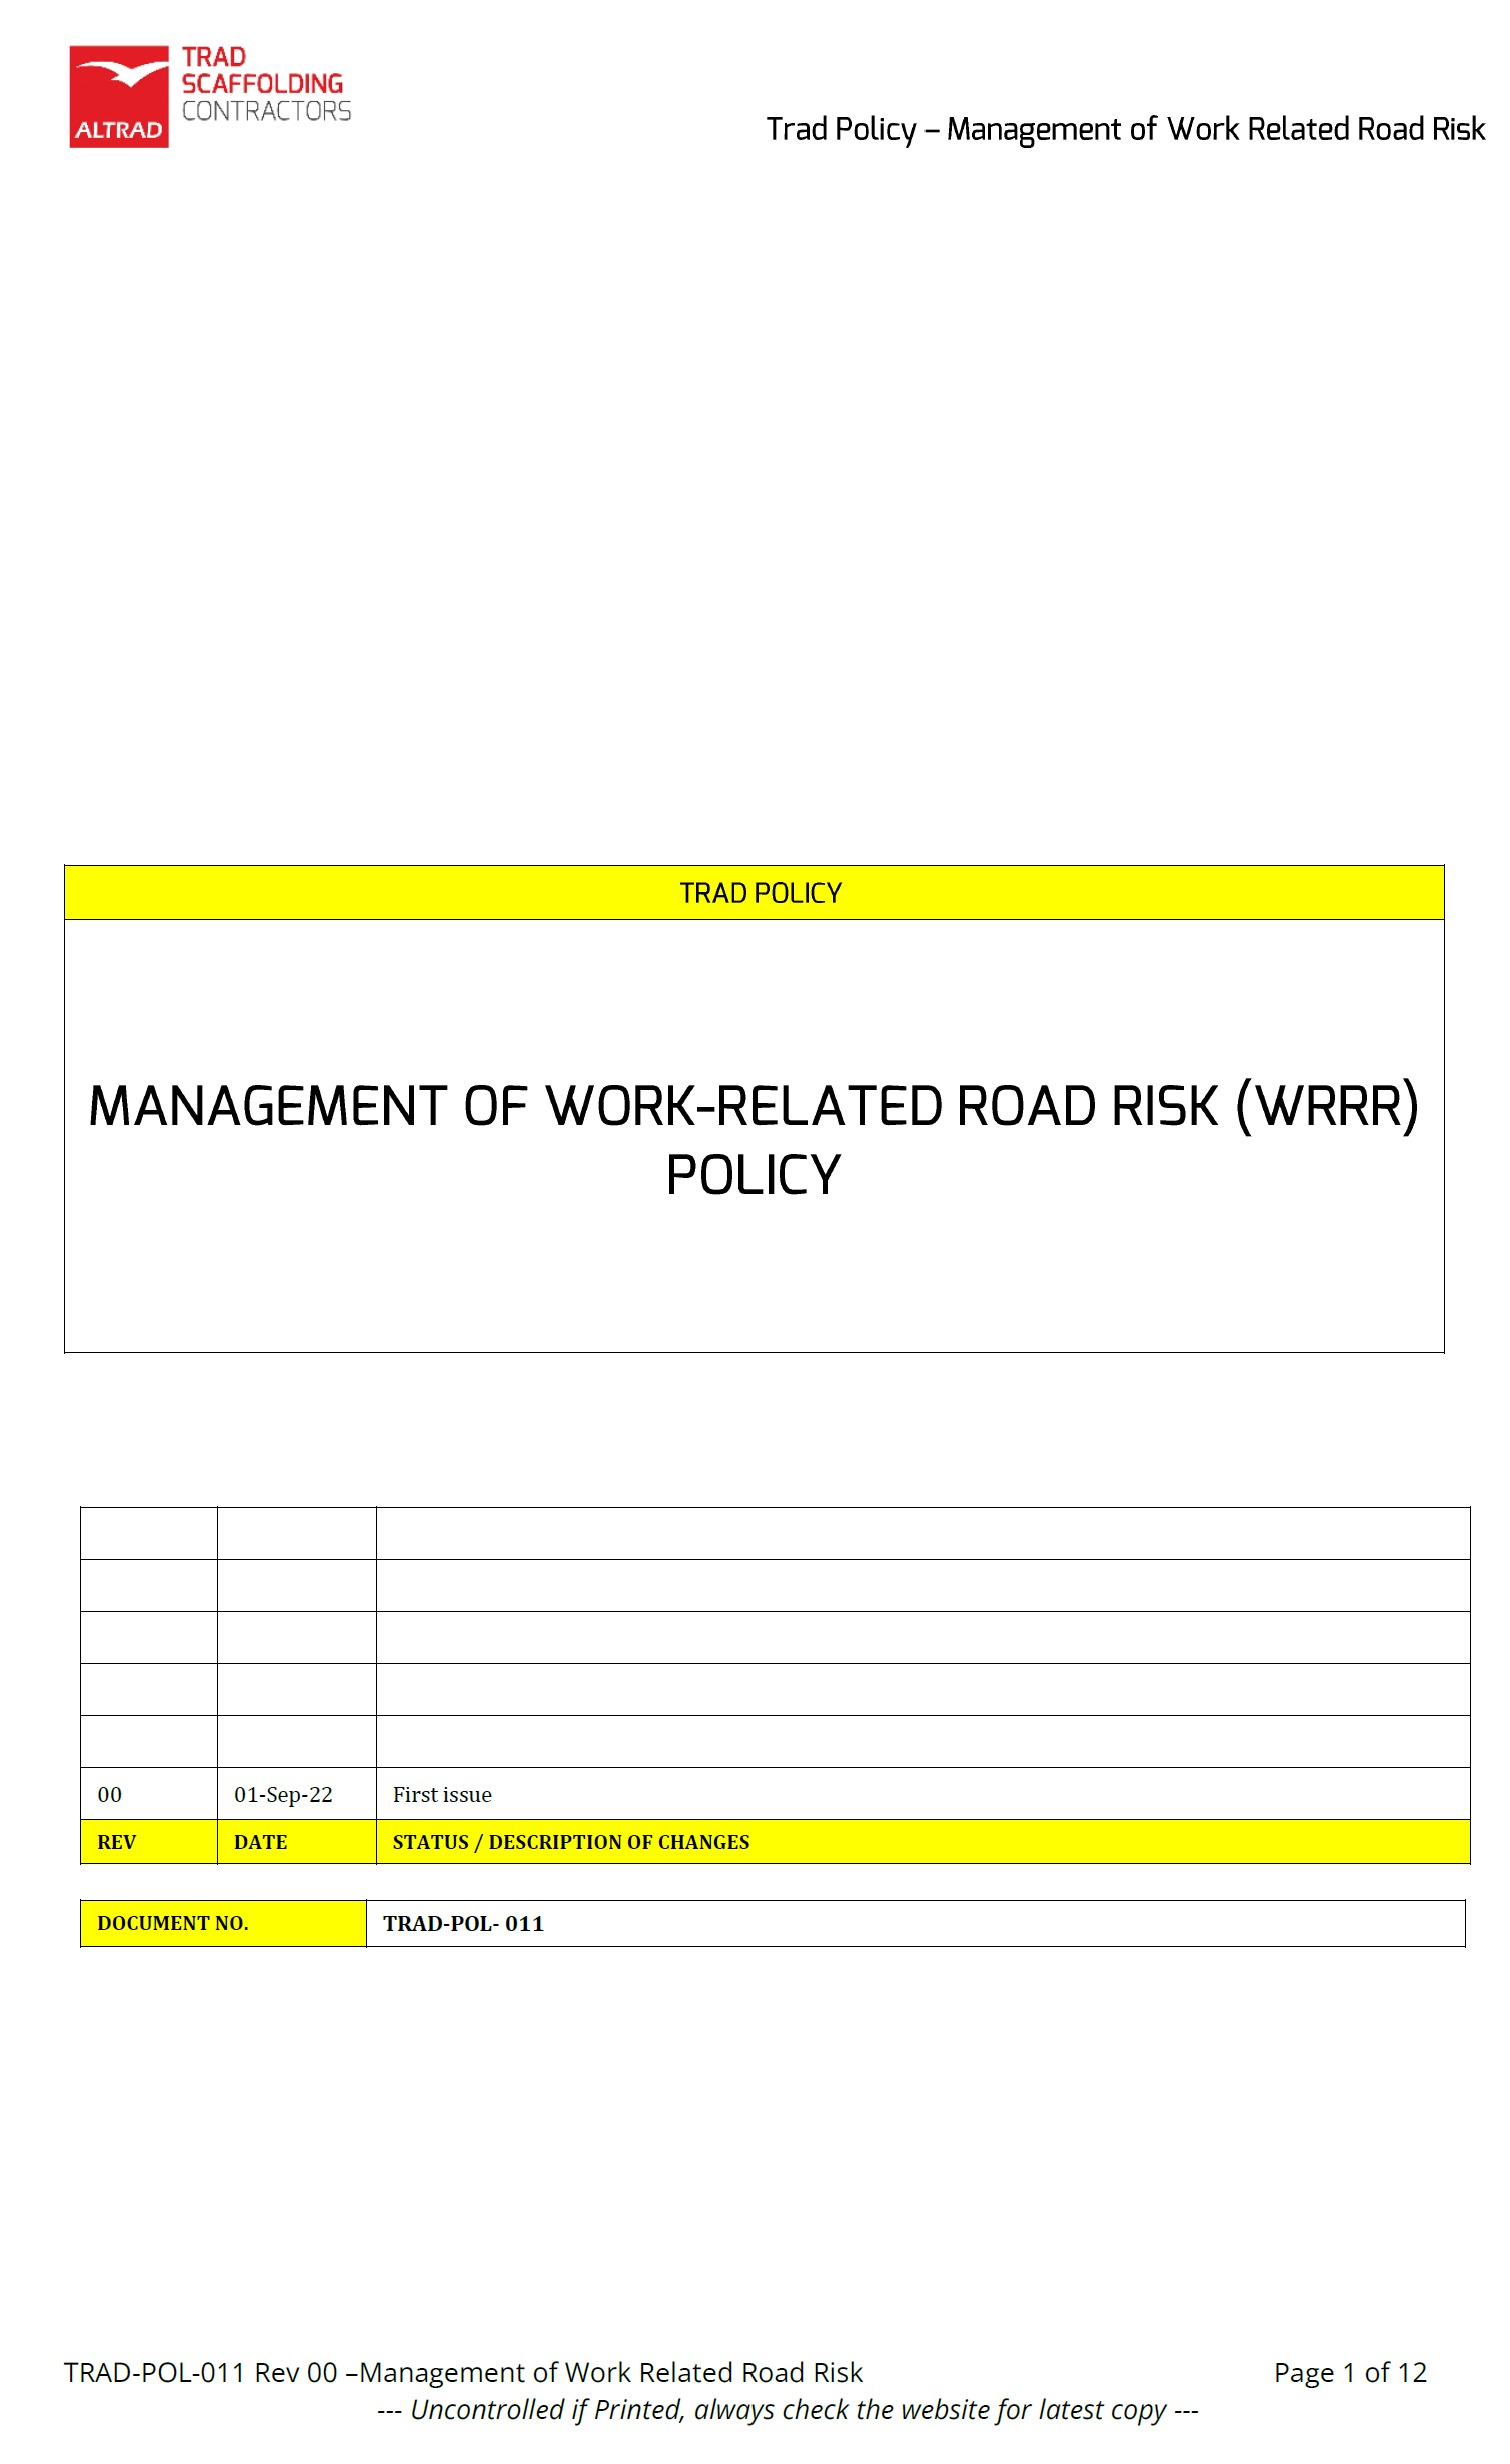 Management of Work Related Road Risk